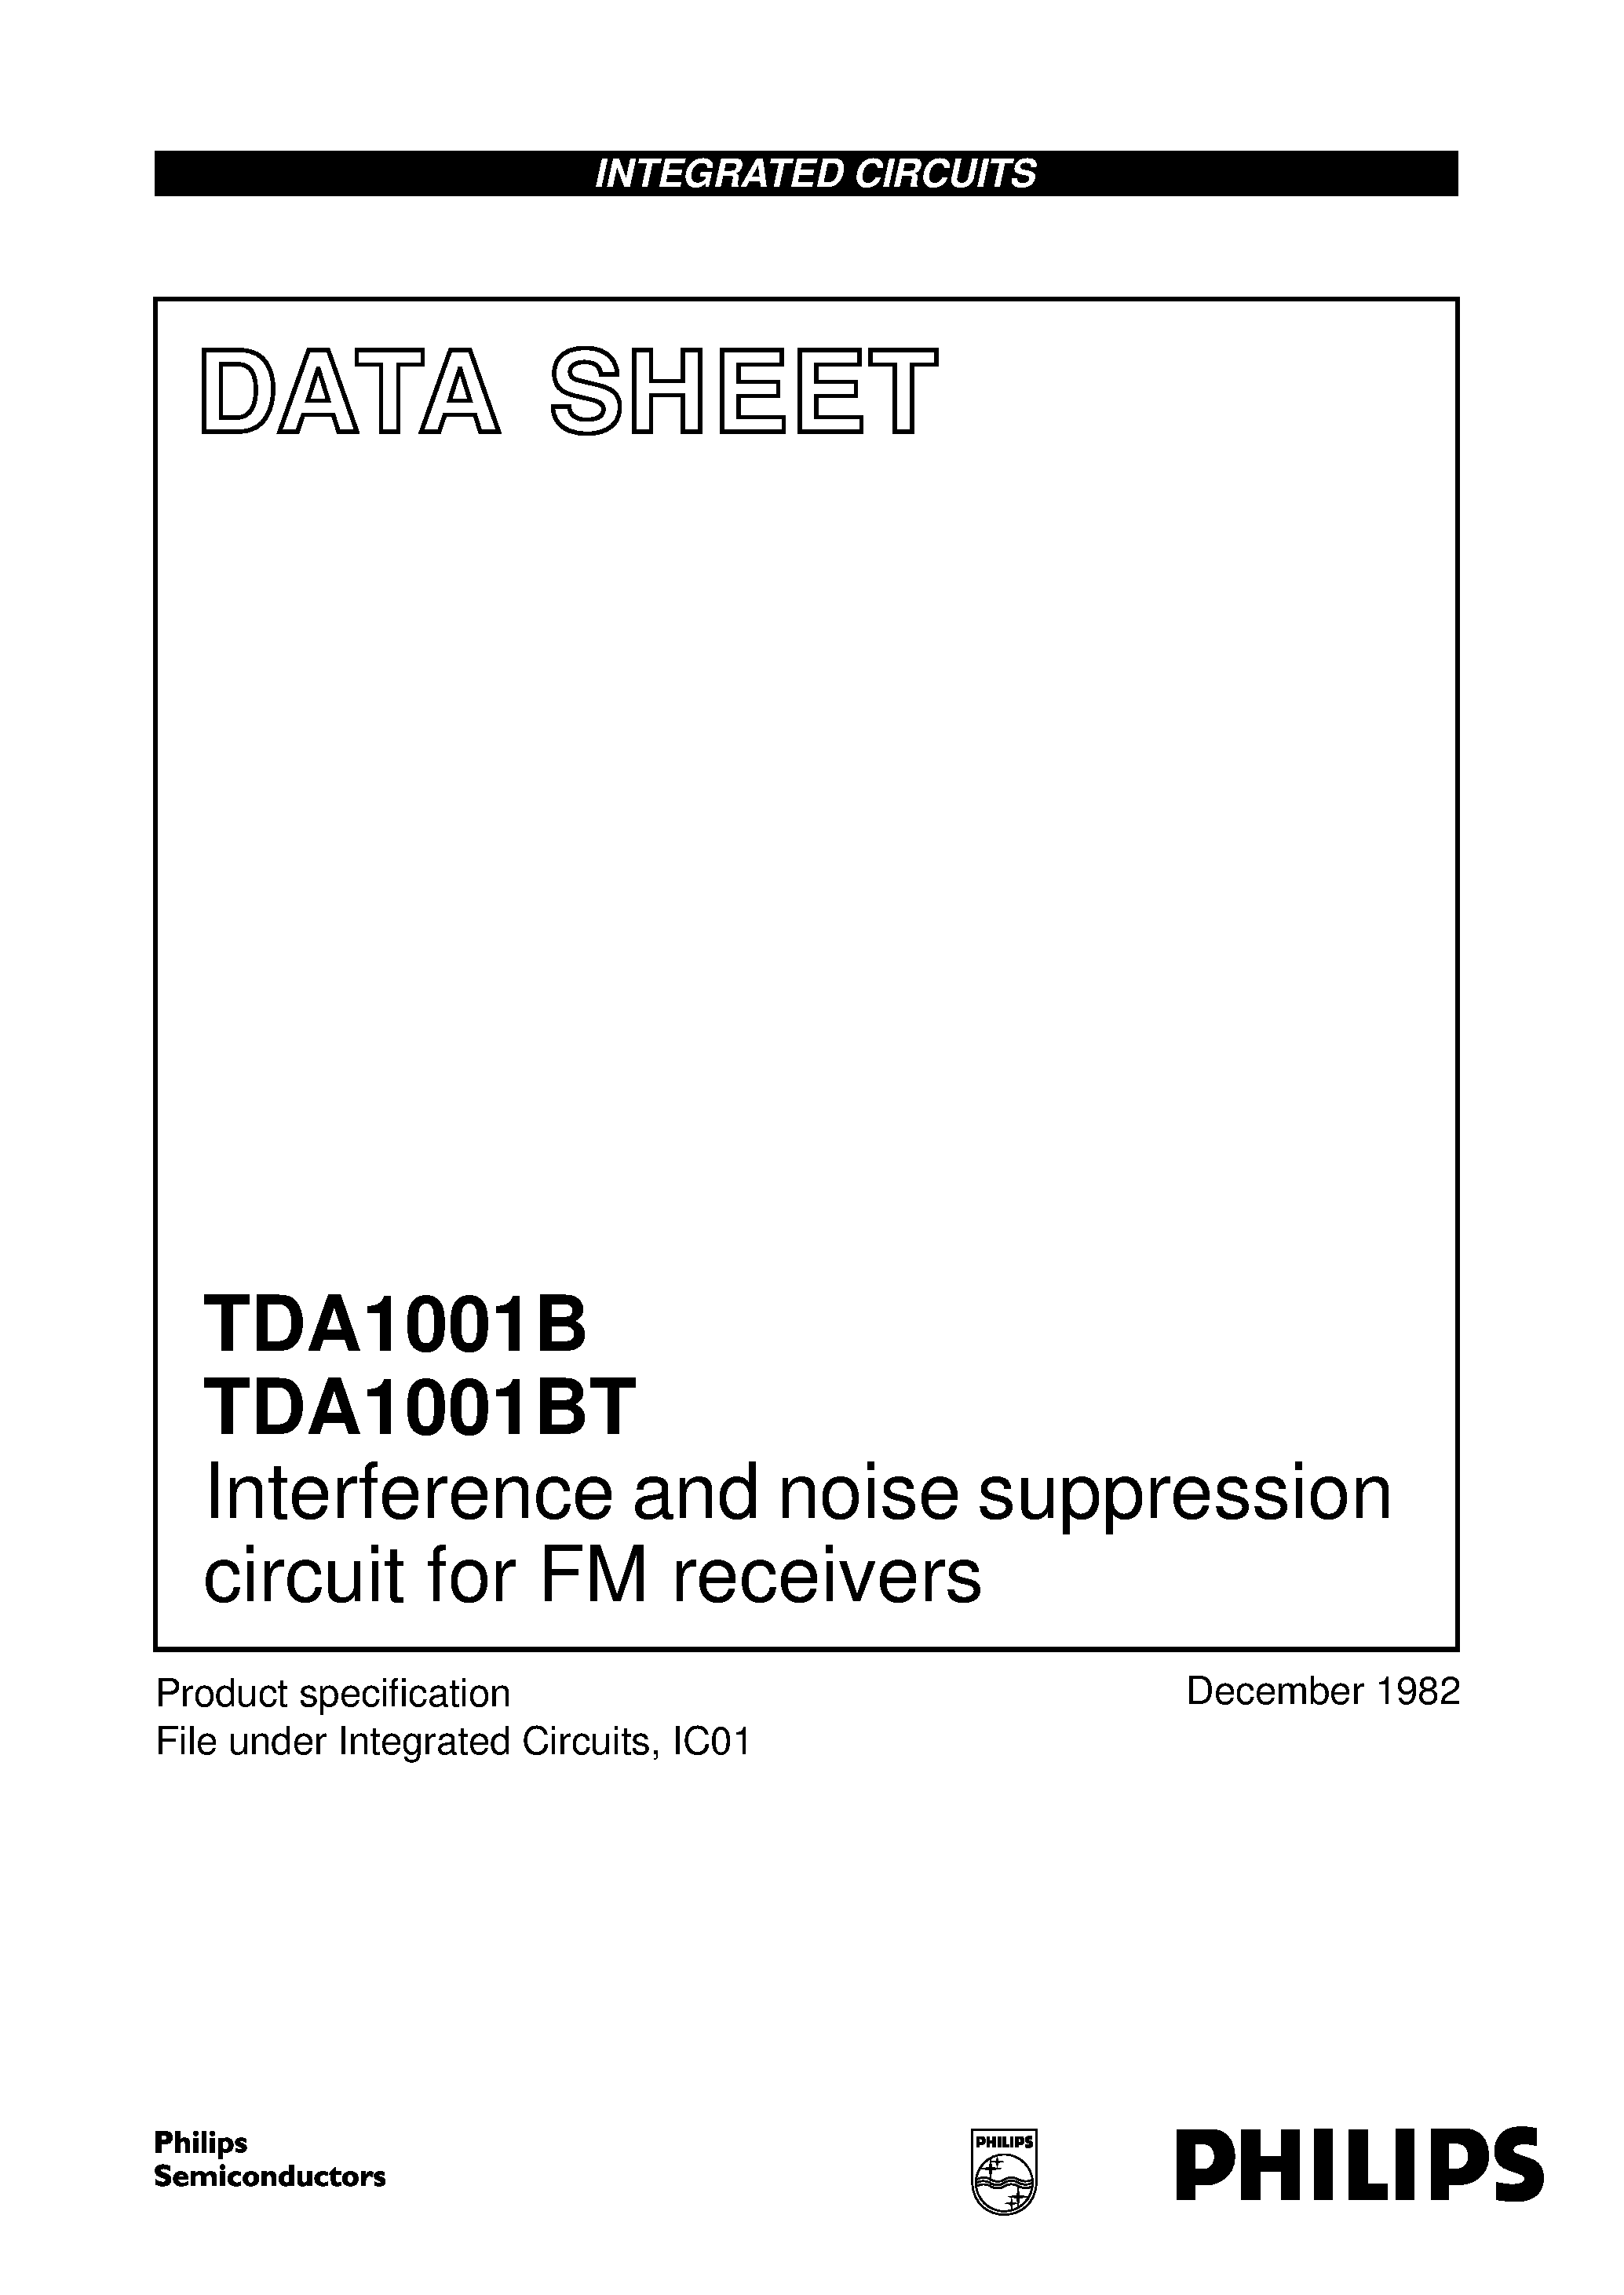 Даташит TDA1001BT - Interference and noise suppression circuit for FM receivers страница 1